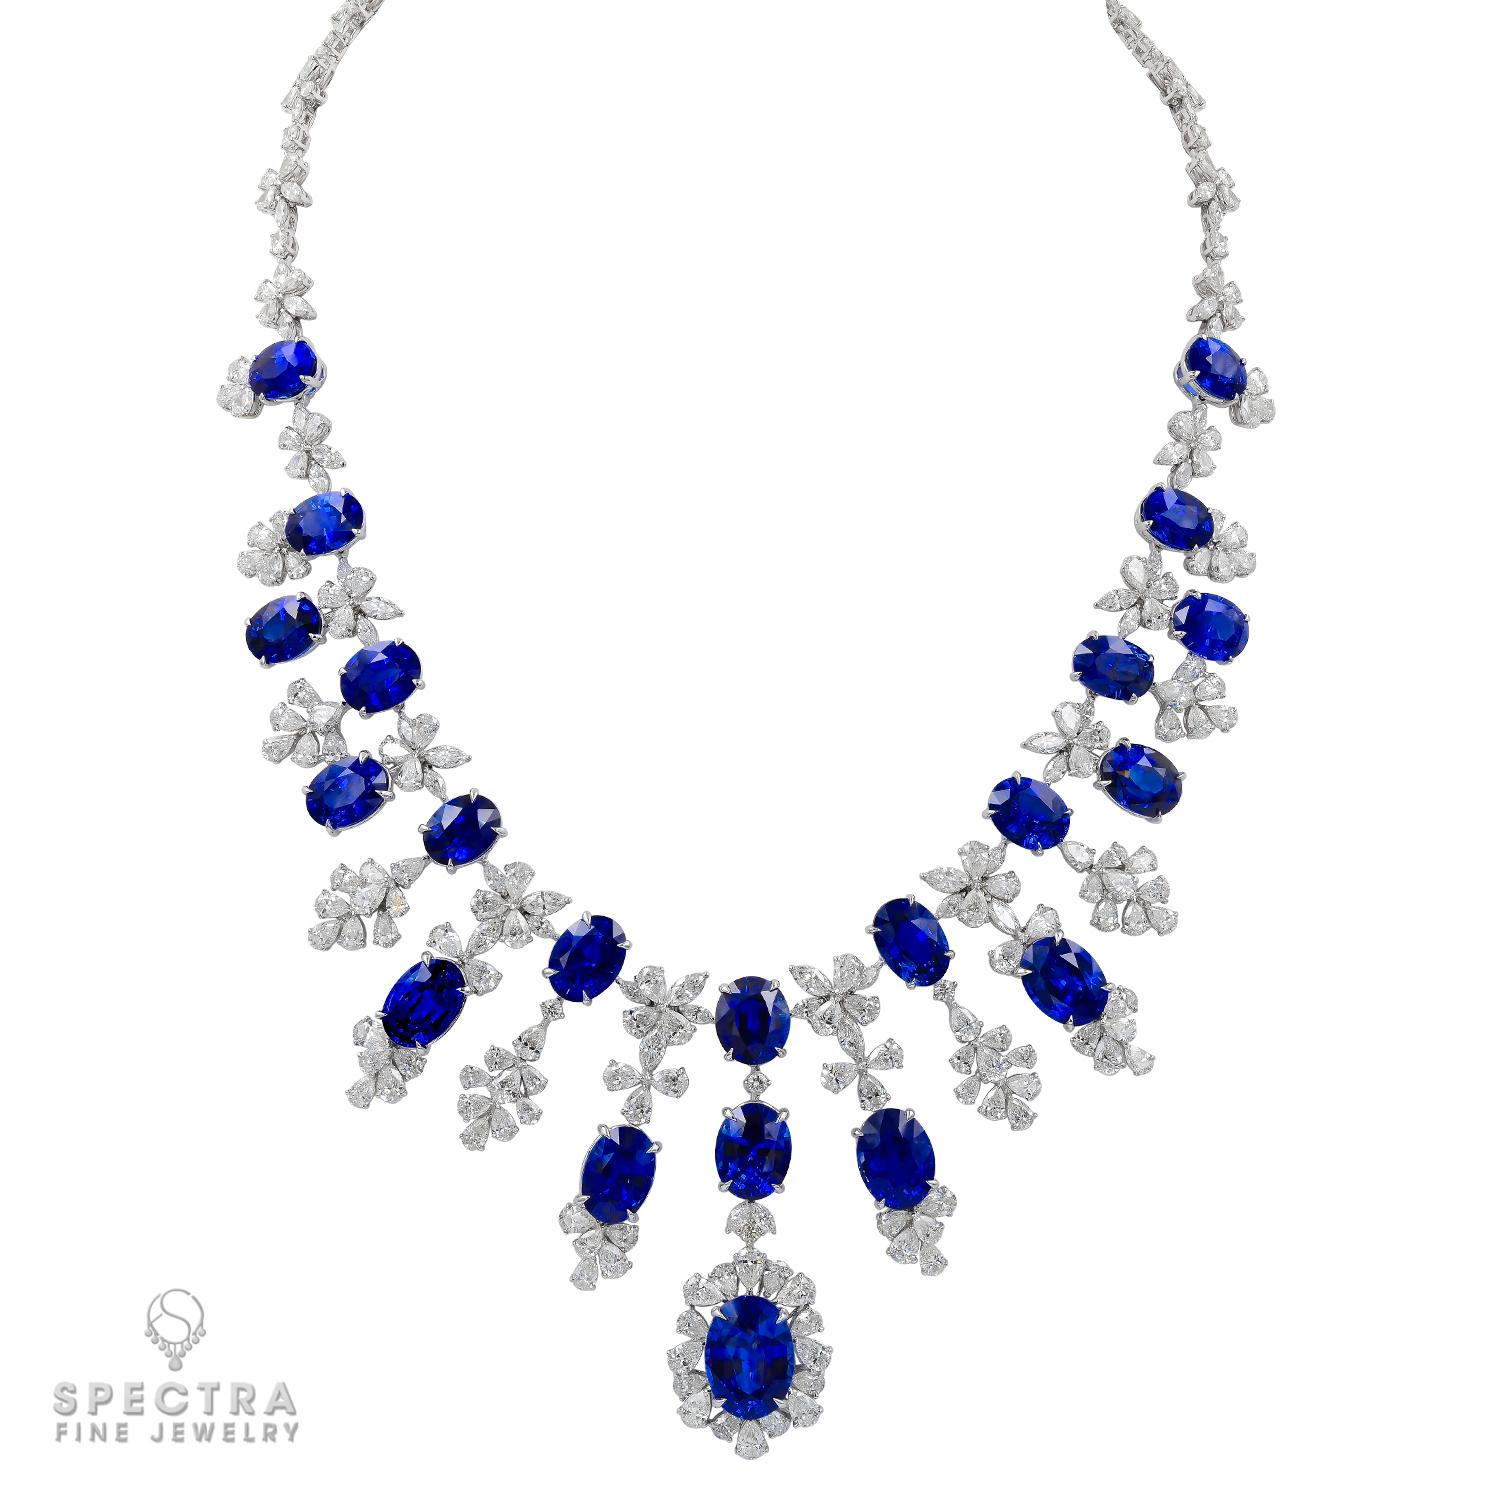 This breathtaking jewelry ensemble effortlessly combines elegance and luxury.

The centerpiece of this suite is a magnificent necklace adorned with 21 oval sapphires totaling 92.21 carats, each gem radiating with the rich, deep blue hues